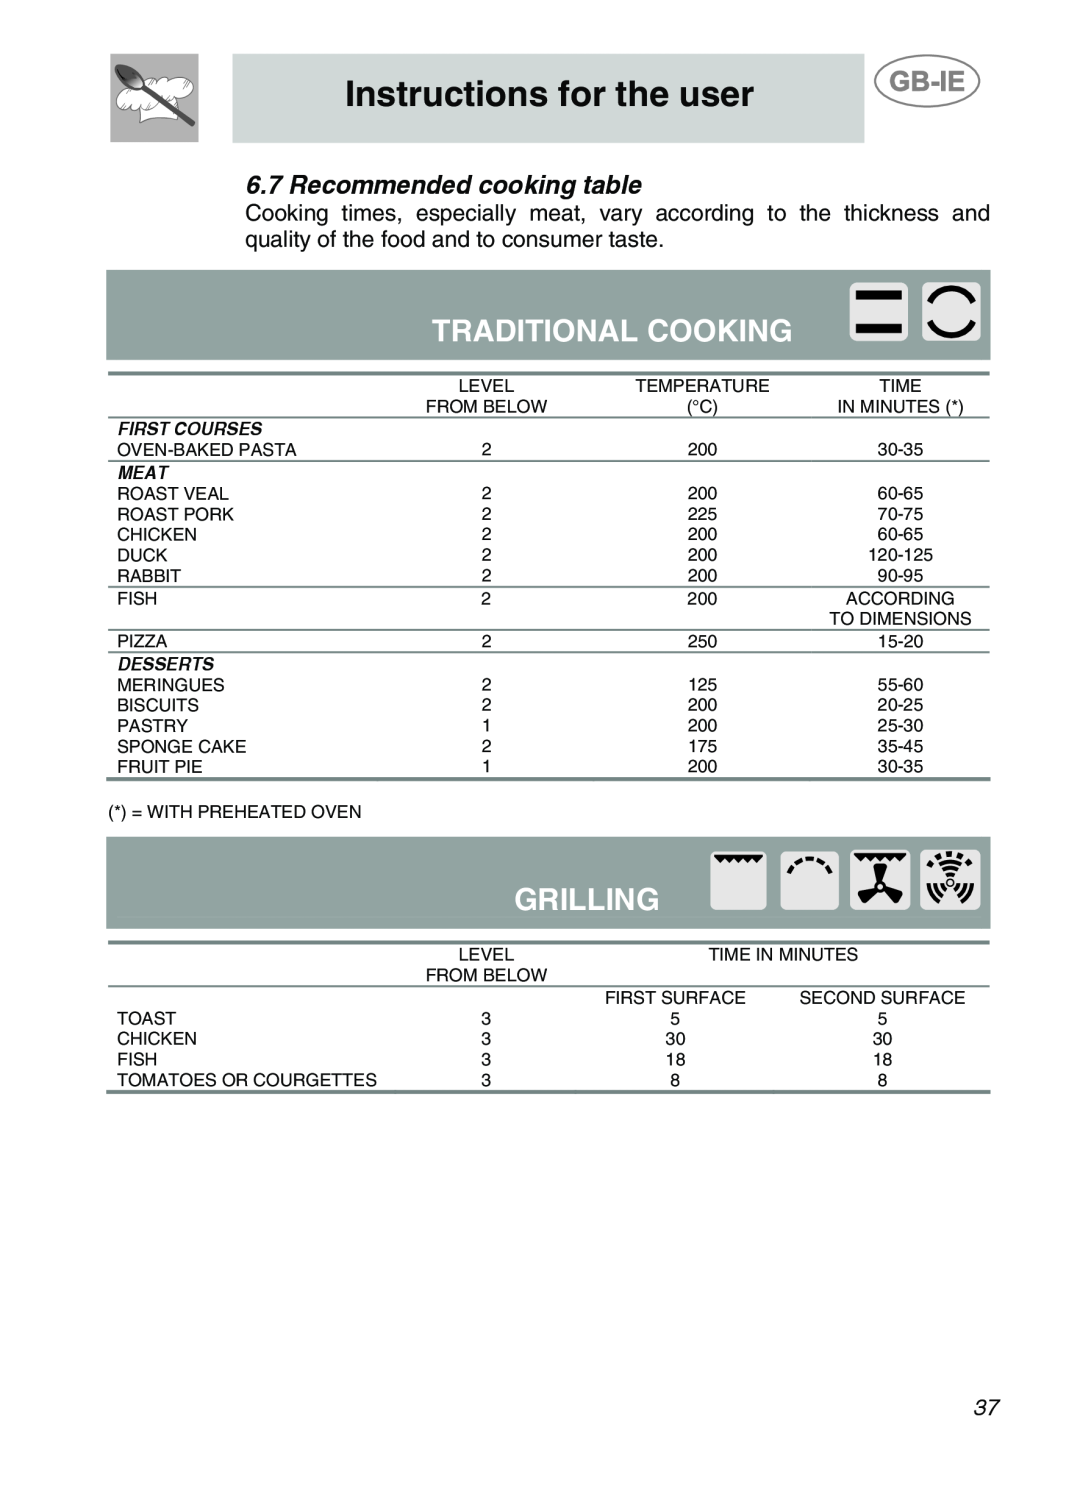 Smeg 9FBYON manual Traditional Cooking, Grilling, Recommended cooking table, Instructions for the user, First Courses, Meat 